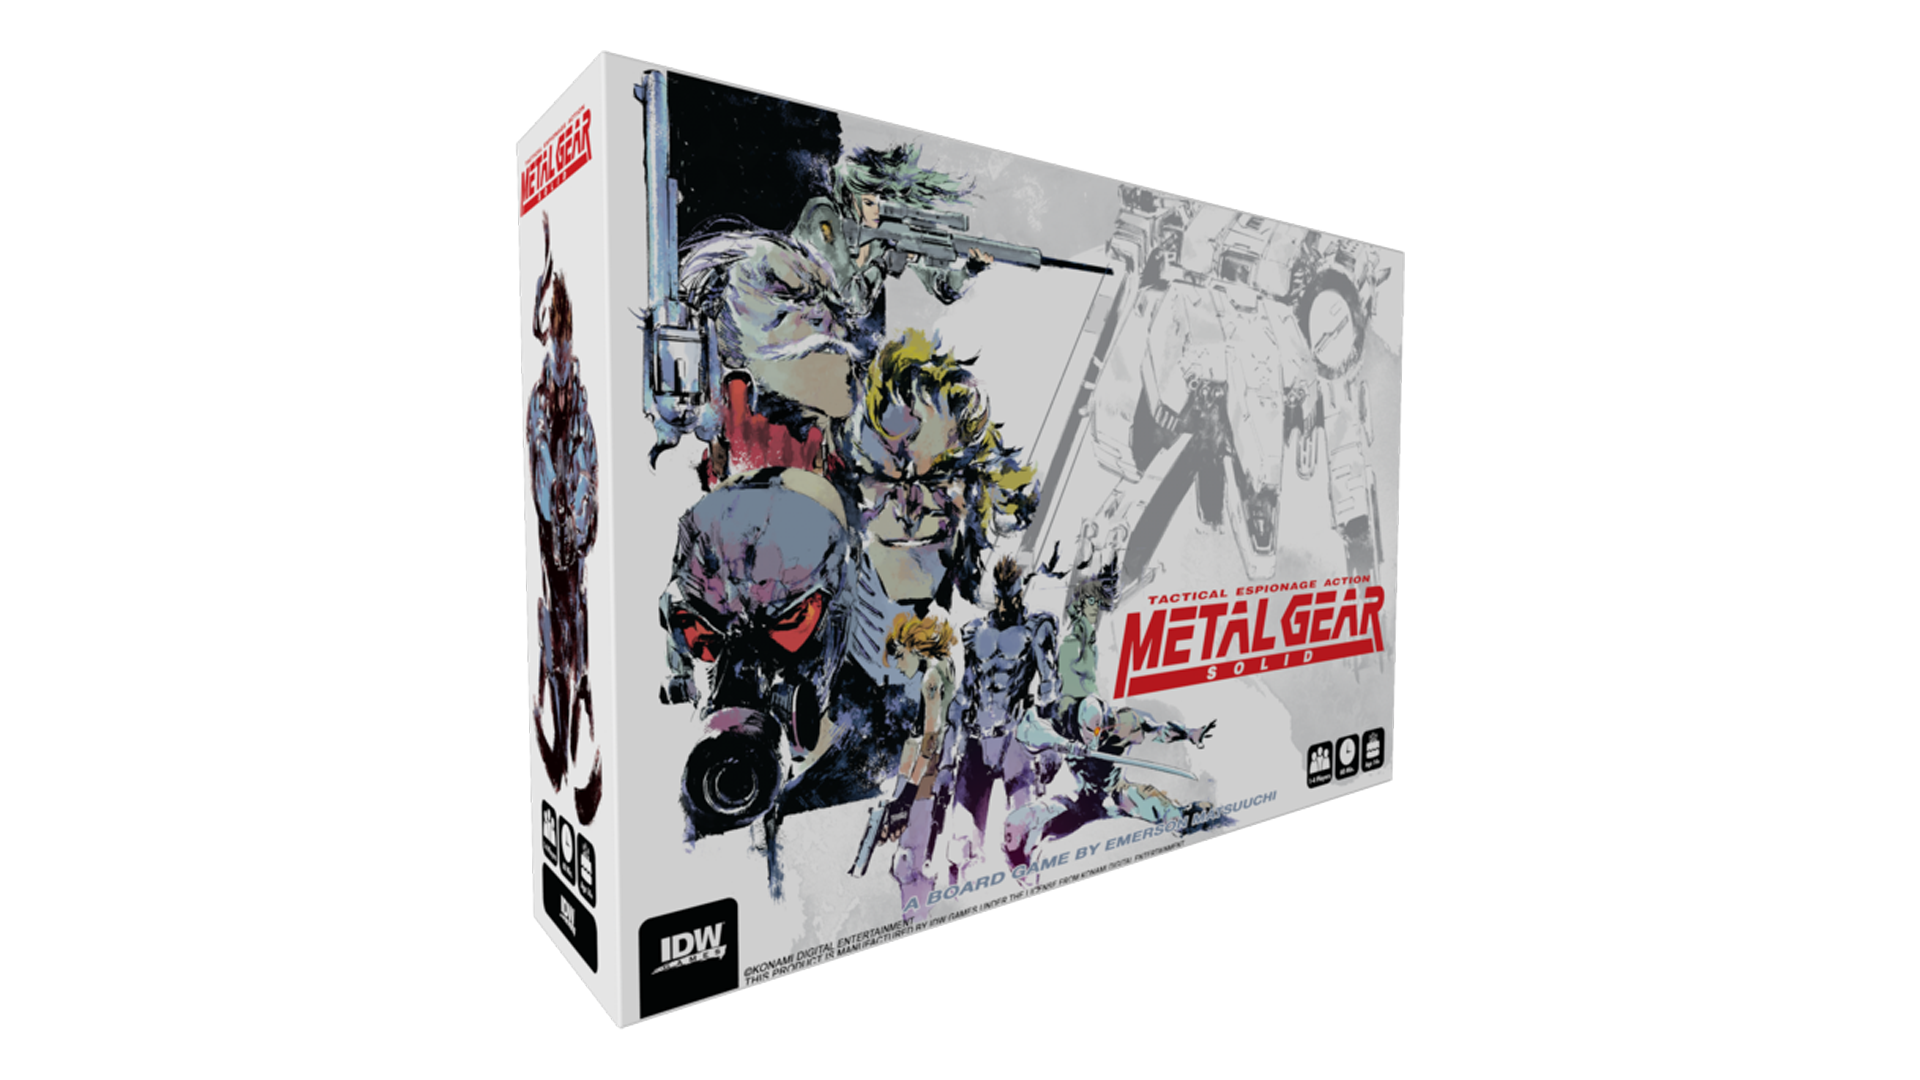 Metal Gear Solid: The Board Game is coming in 2020 after multiple delays.